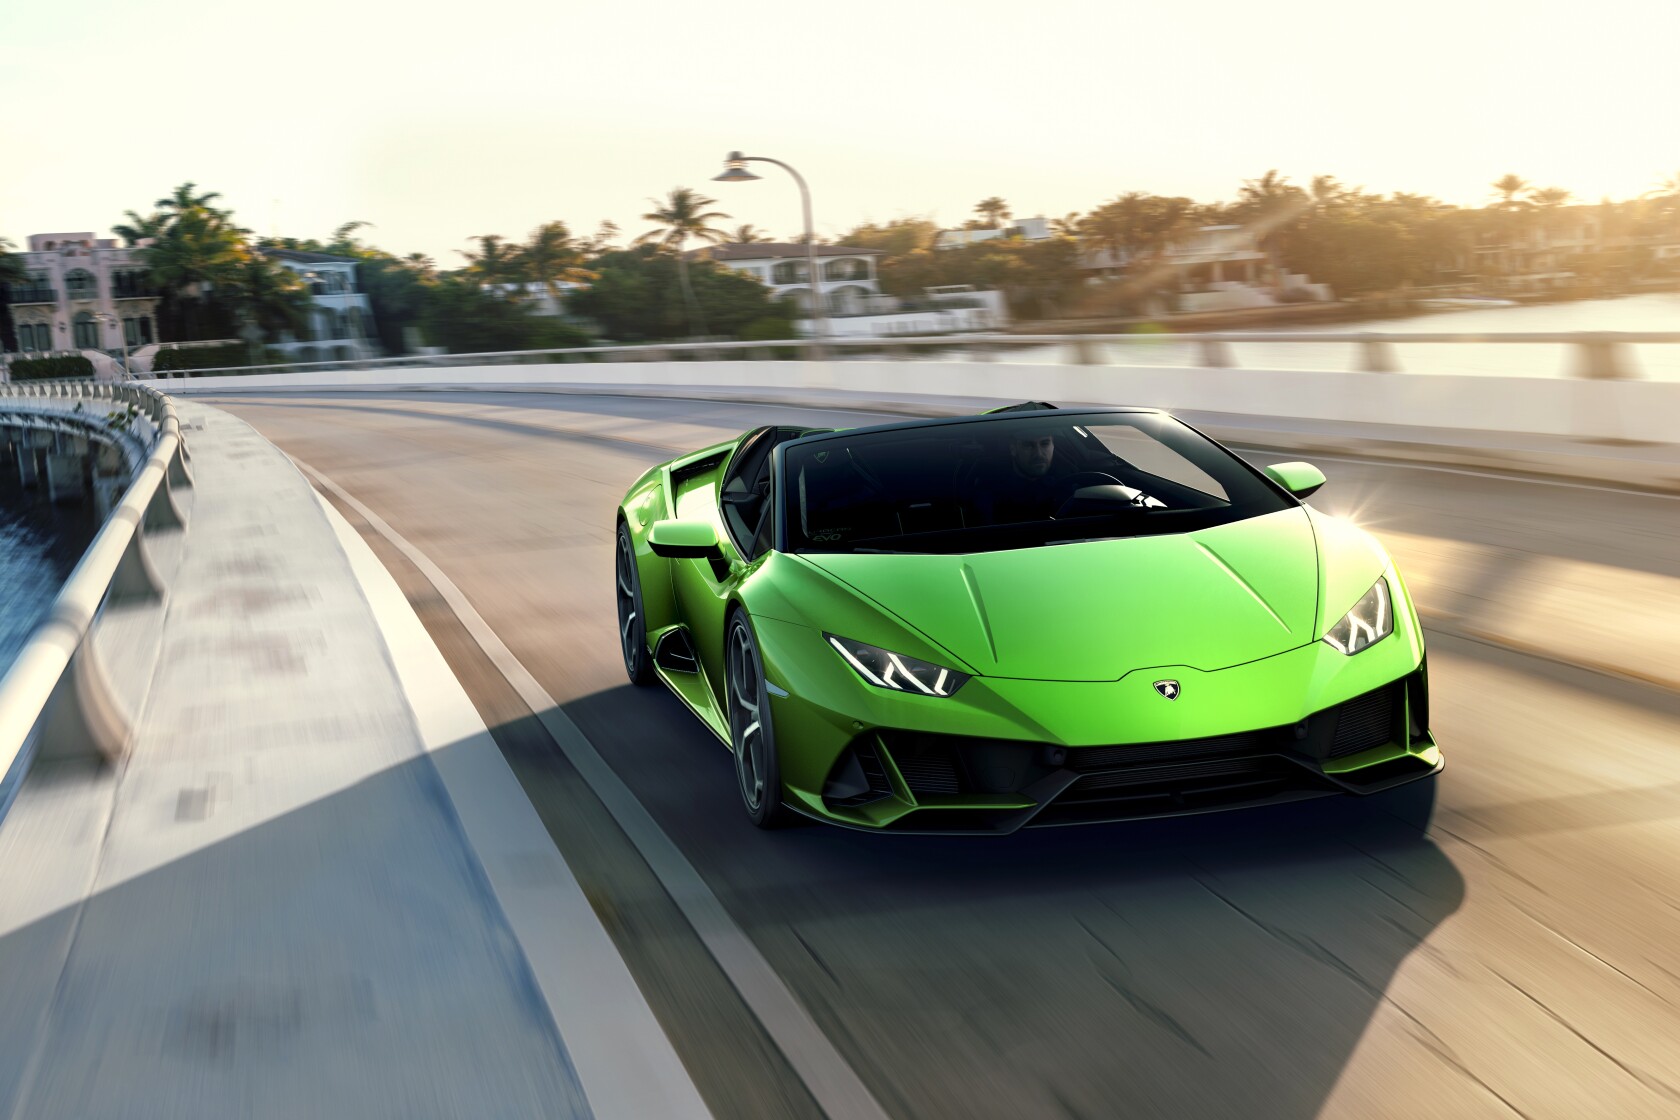 Lamborghinis 2020 Huracan Evo Is A Hell Of A Ride But